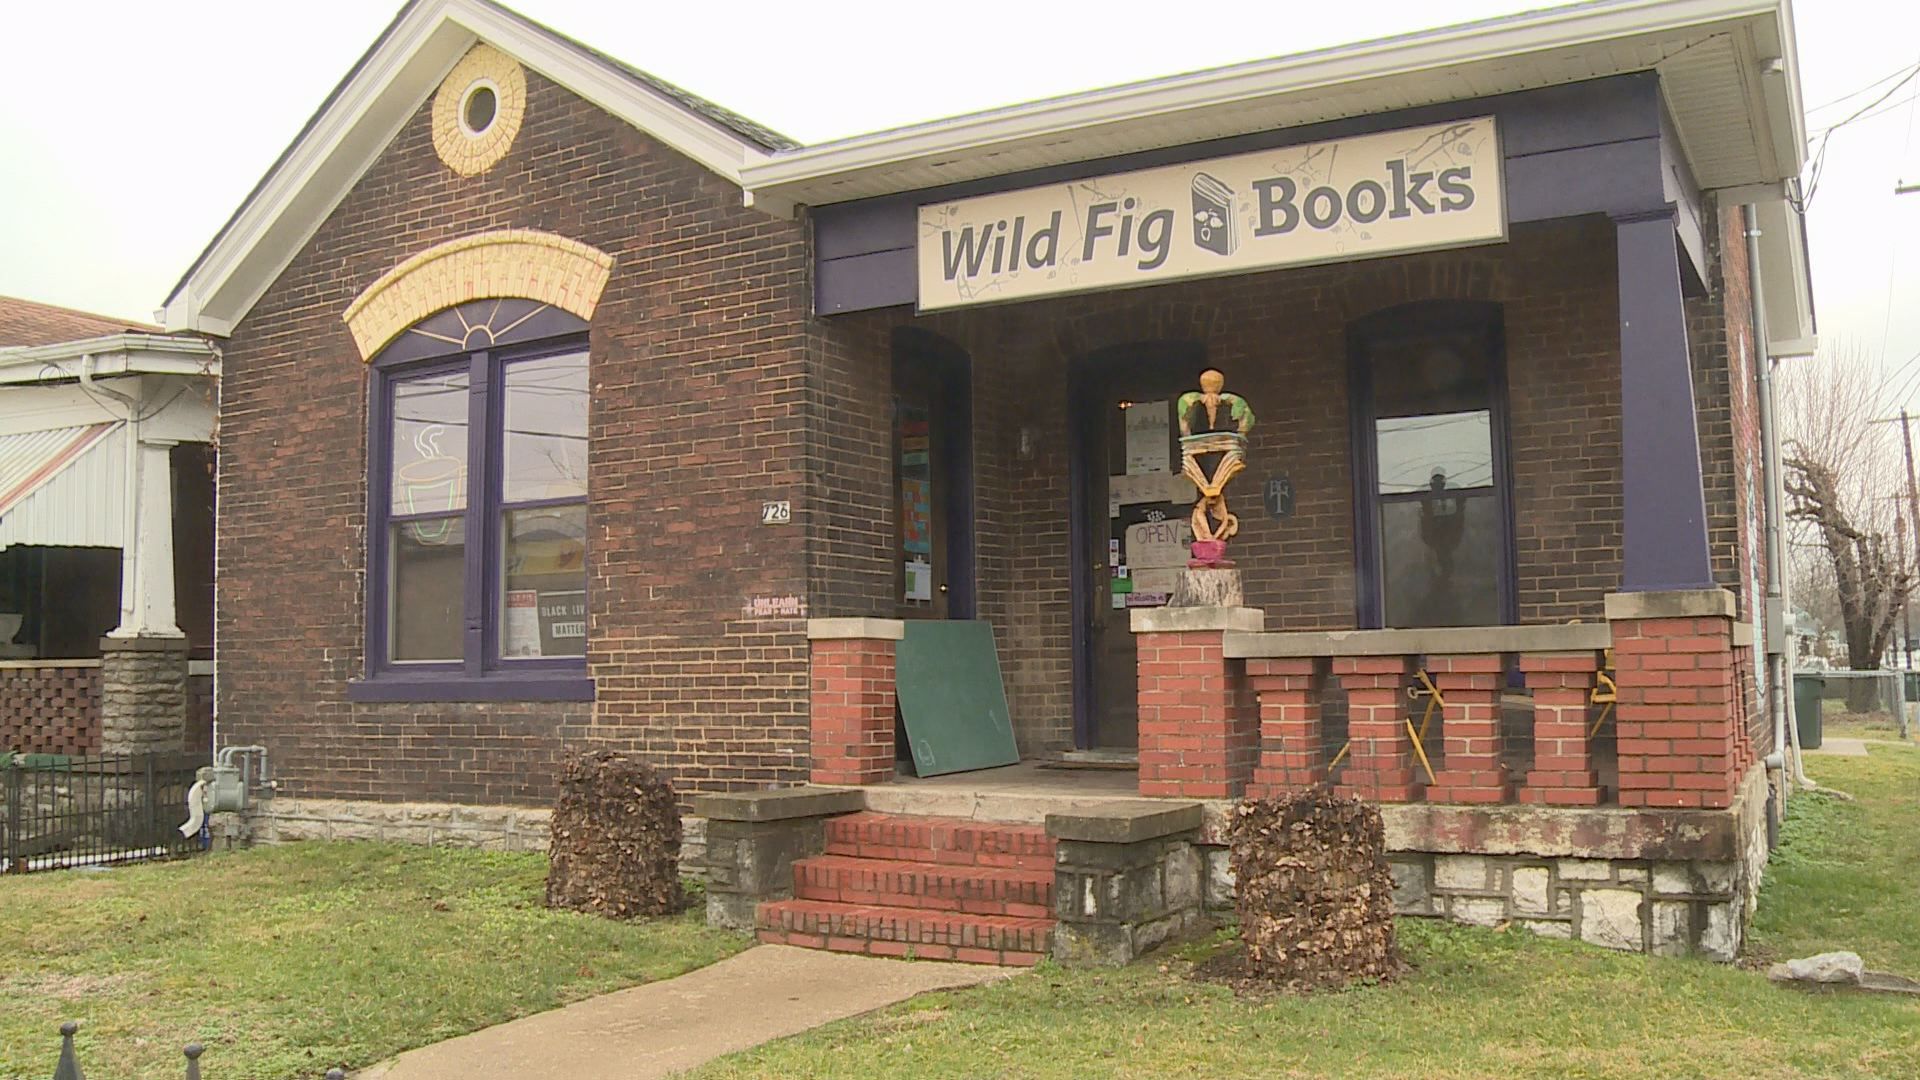 Downtown Lexington gains first book store since last one closed in